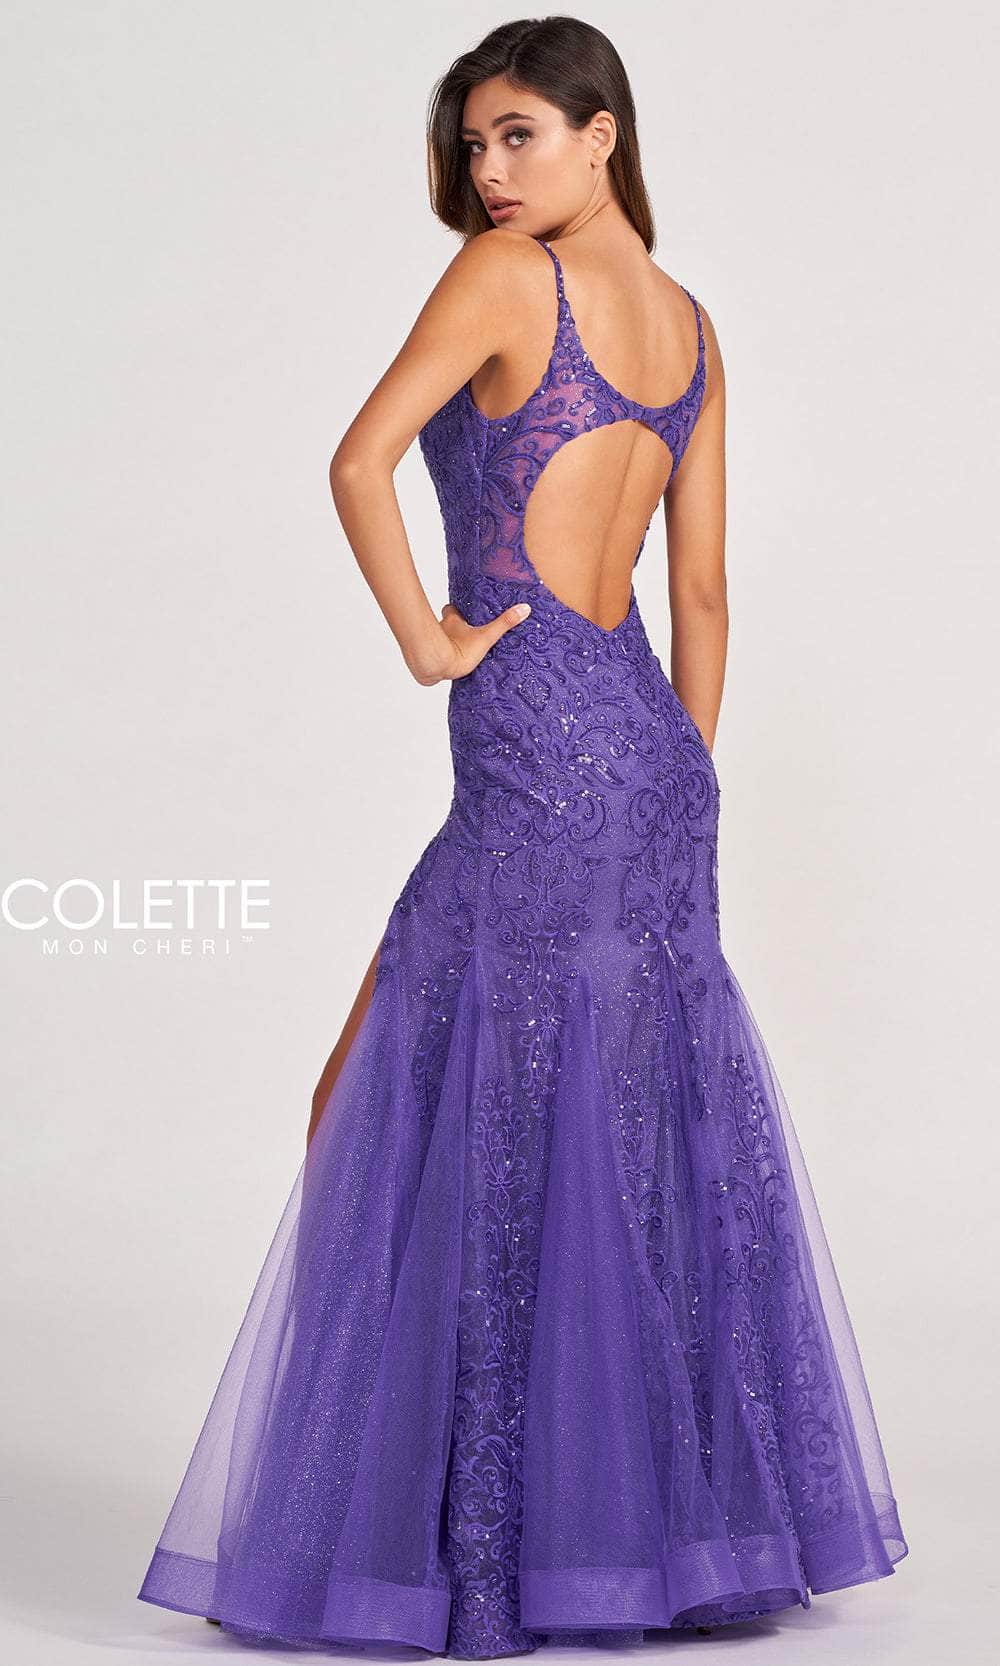 Colette for Mon Cheri CL2024 - Sleeveless Back Cut-Out Evening Dress Prom Dresses